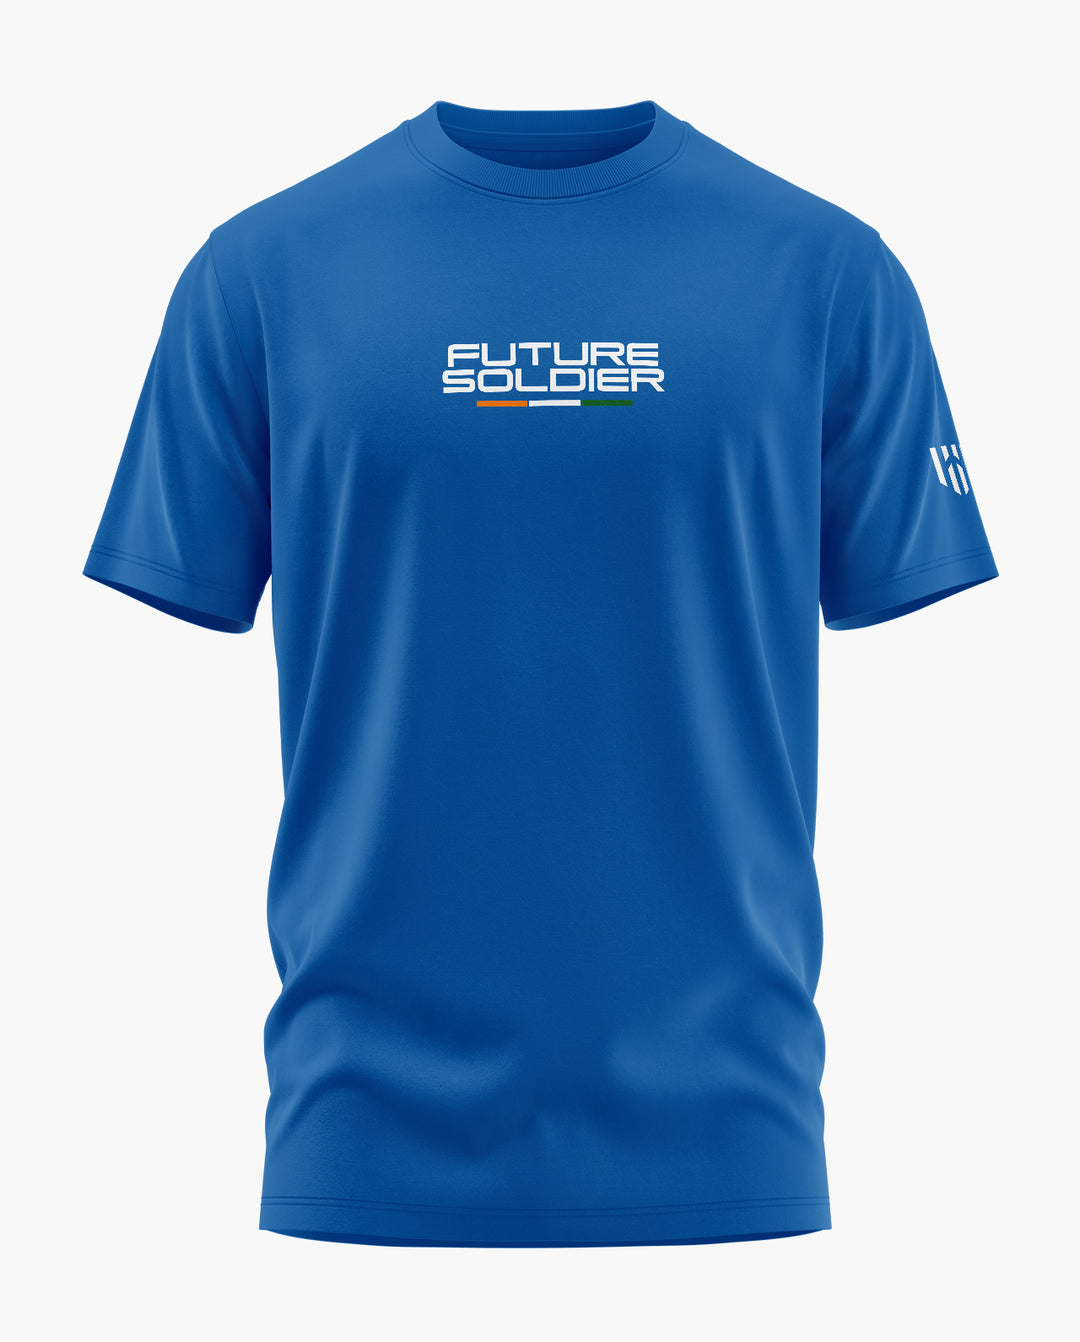 Future Soldier T-Shirt